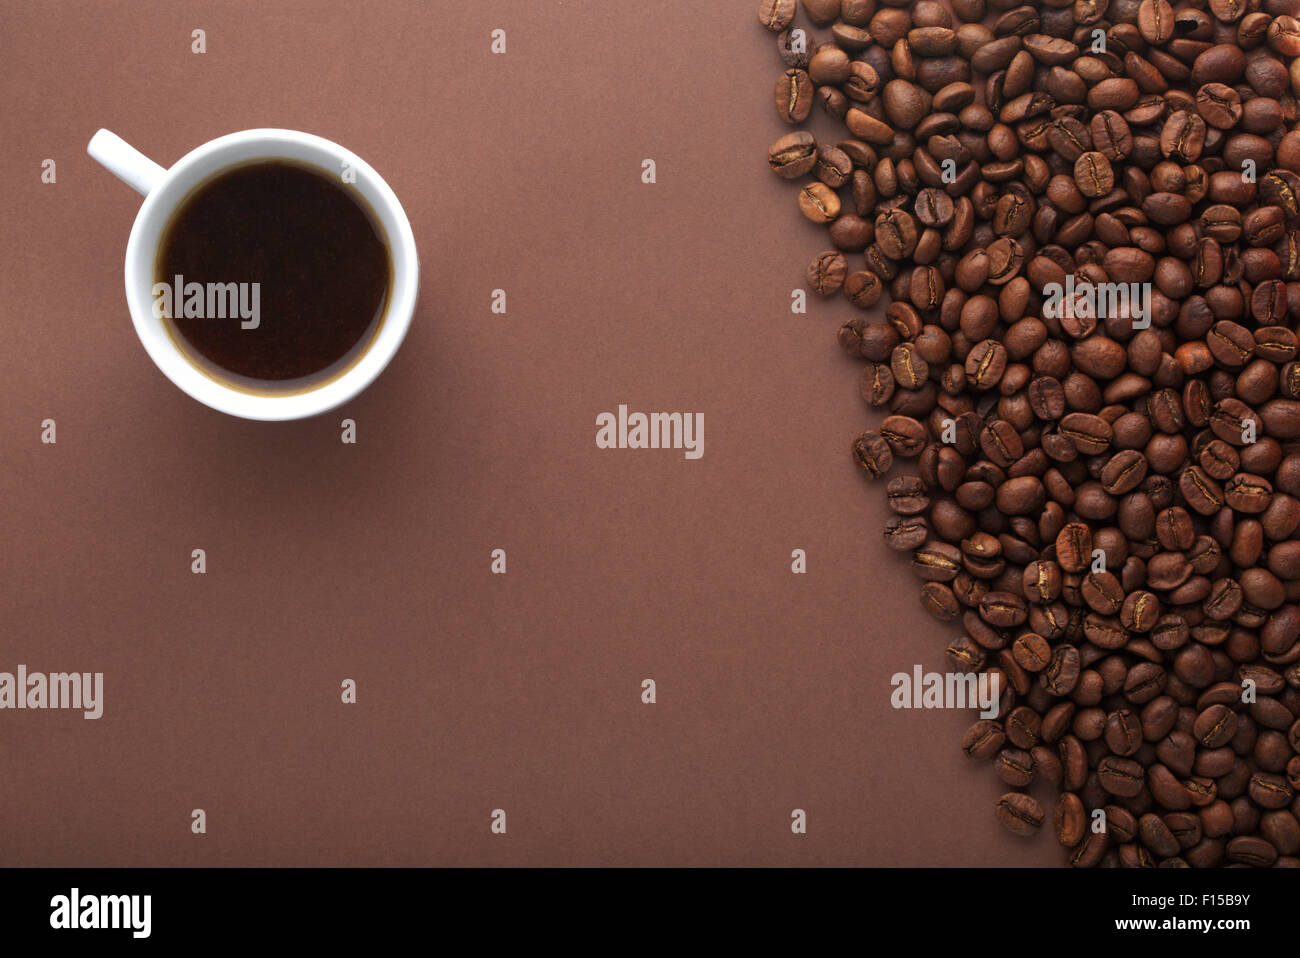 Hot coffee cup and beans on a brown background. Top view Stock Photo